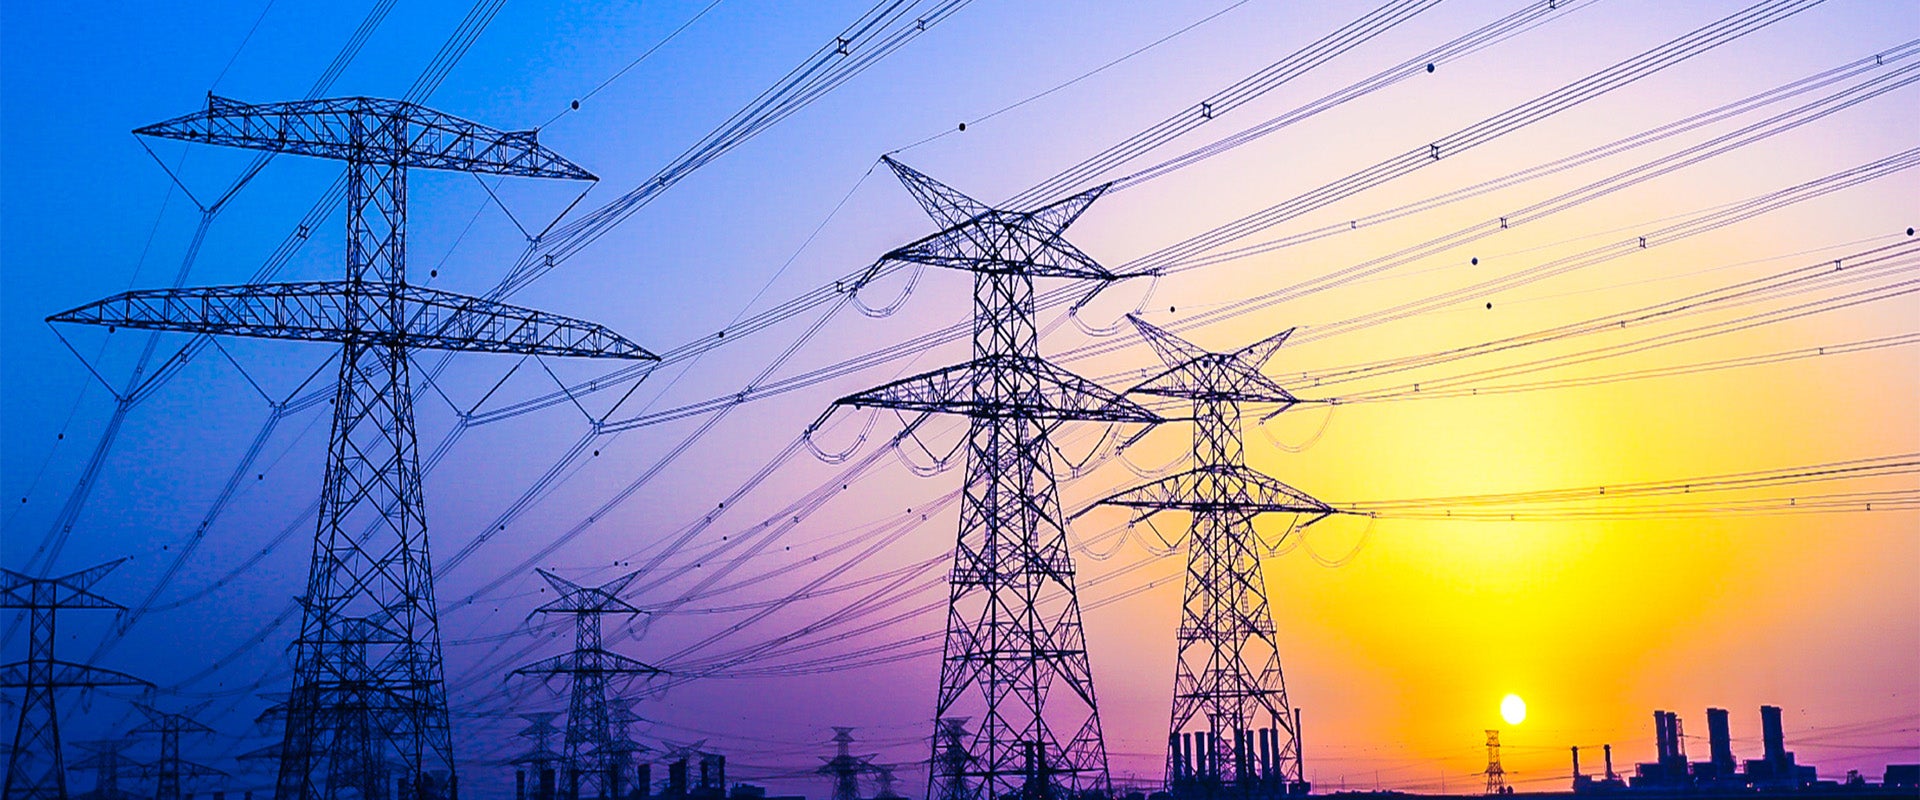 Power Transmission: The Missing Link Between Investors and Infrastructure in Brazil Has Been Found